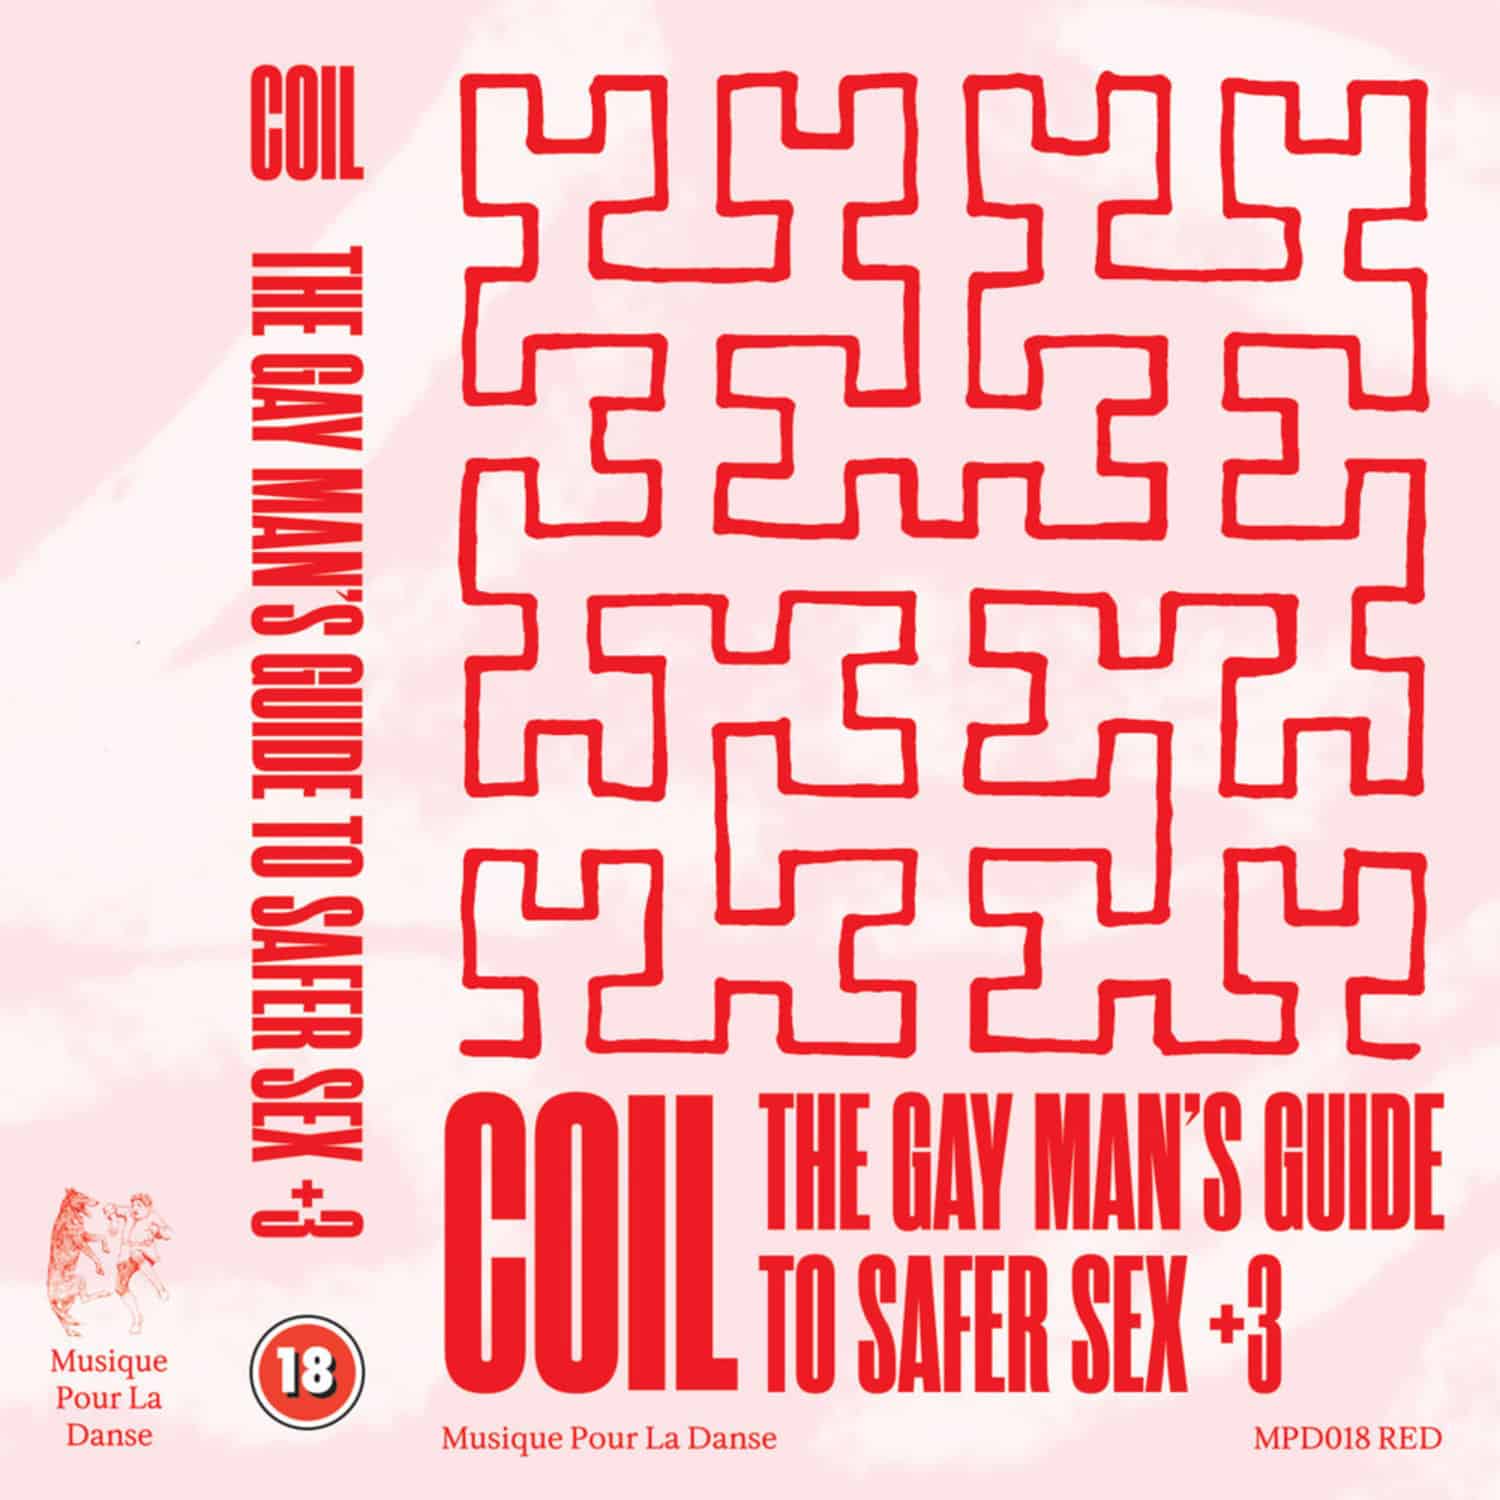 COIL - THE GAY MANS GUIDE TO SAFER SEX +3 